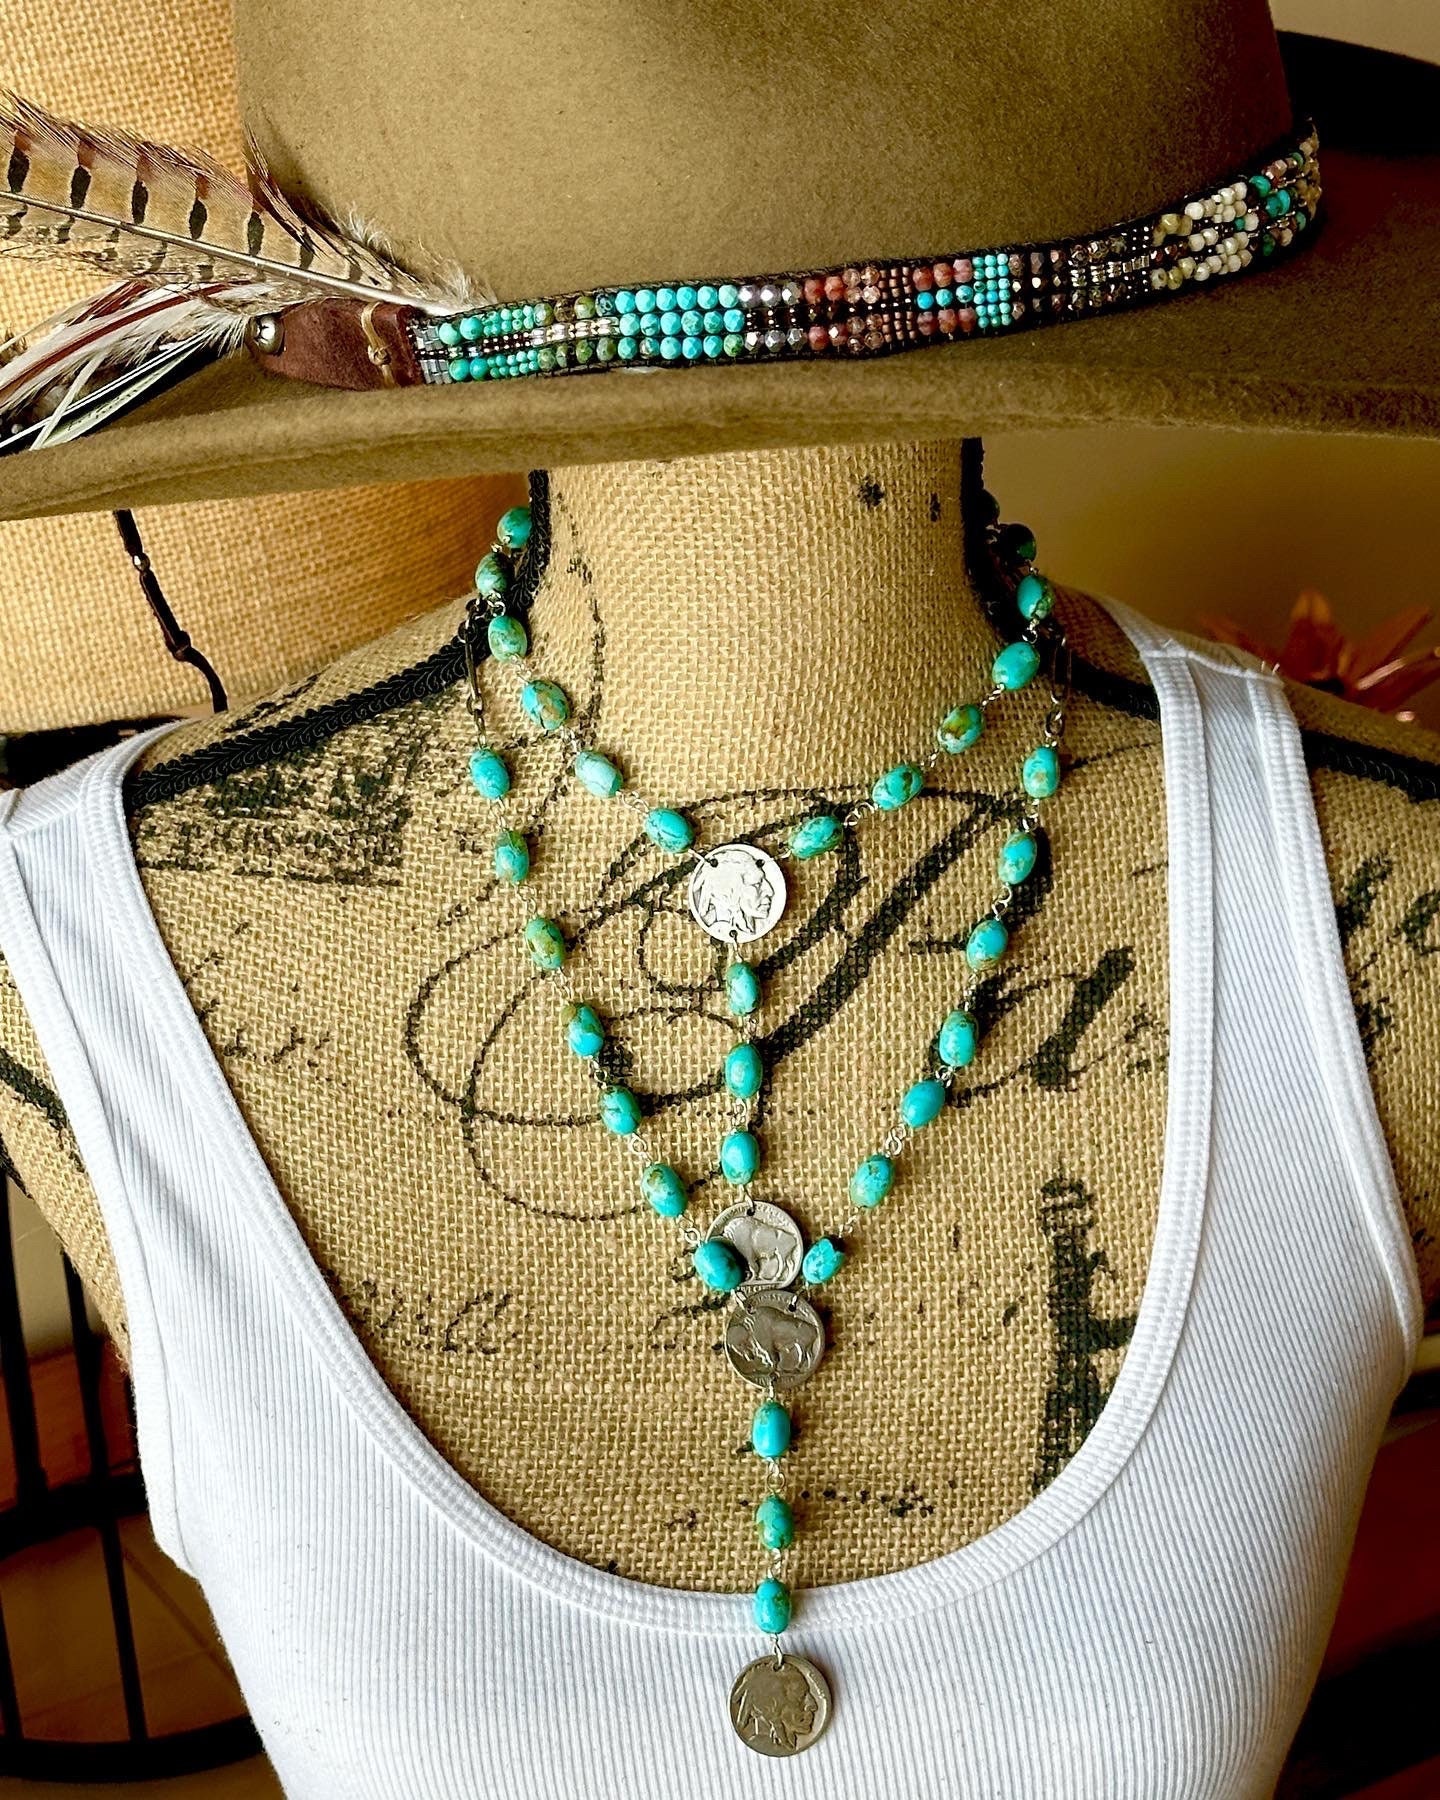 Shiner Fashion Turquoise Lariat Necklace & Earrings - Accessorize